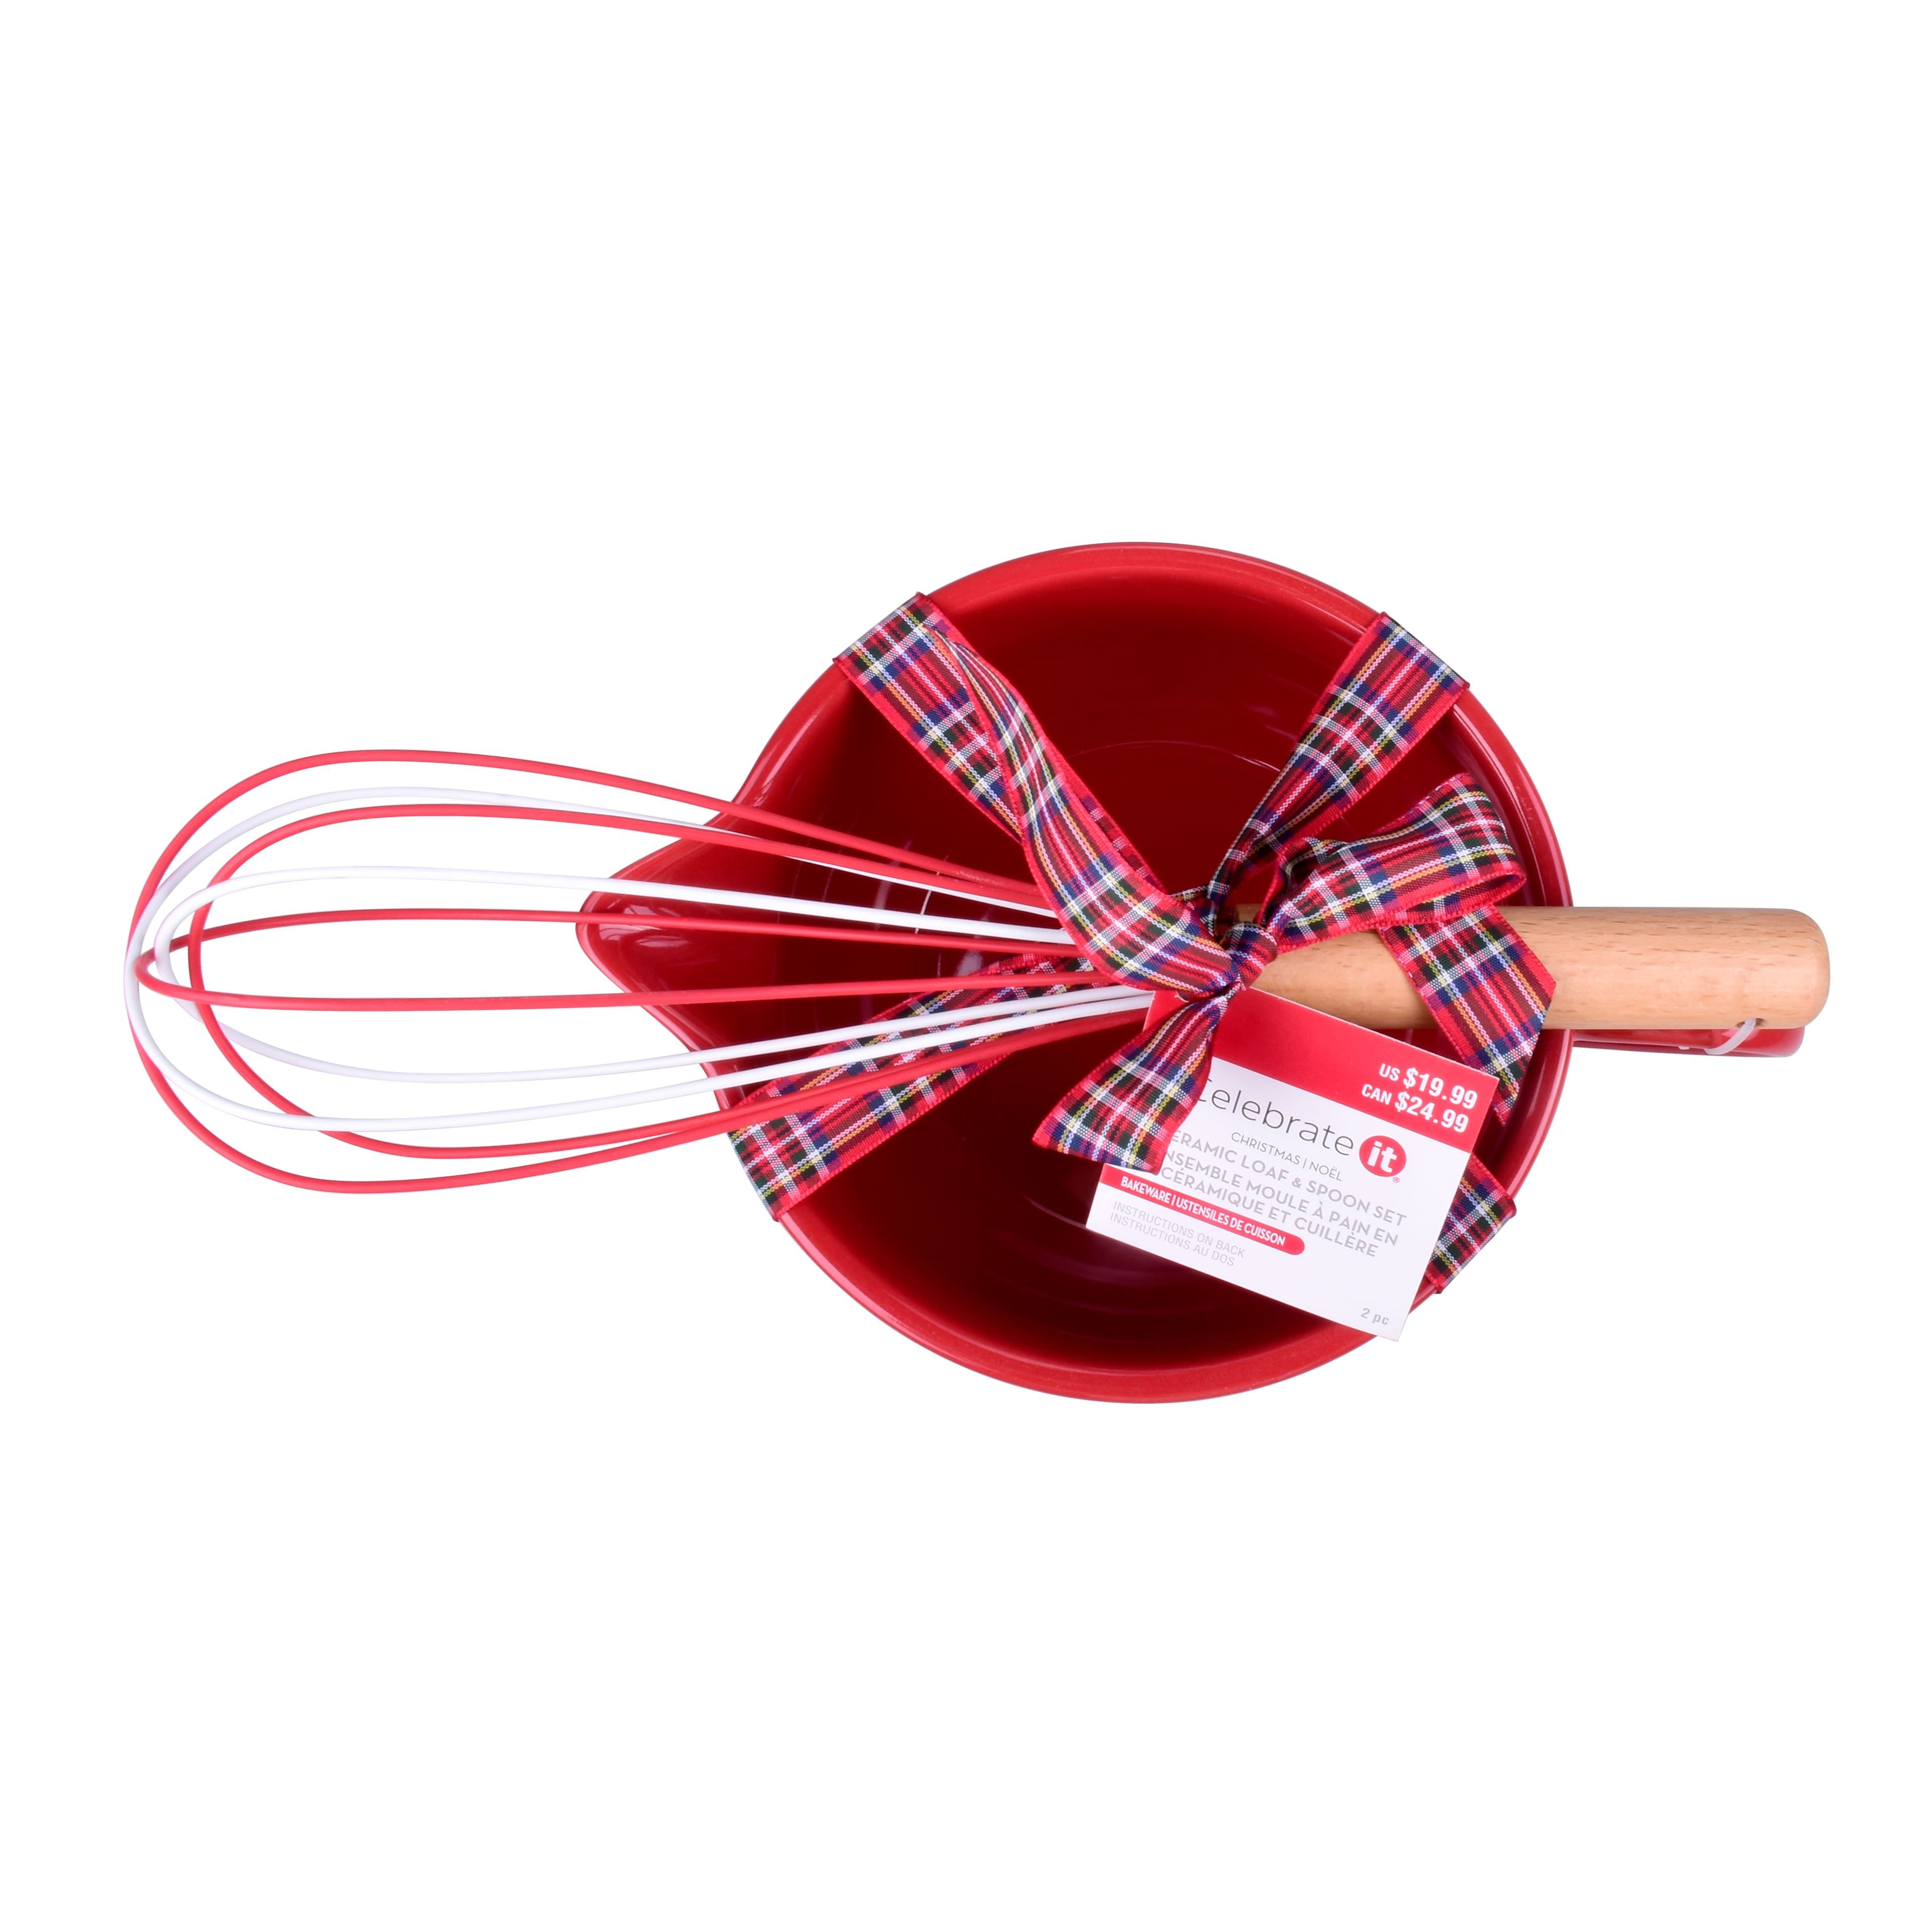 Red Merry Christmas Bowl & Whisk Baking Set by Celebrate It™